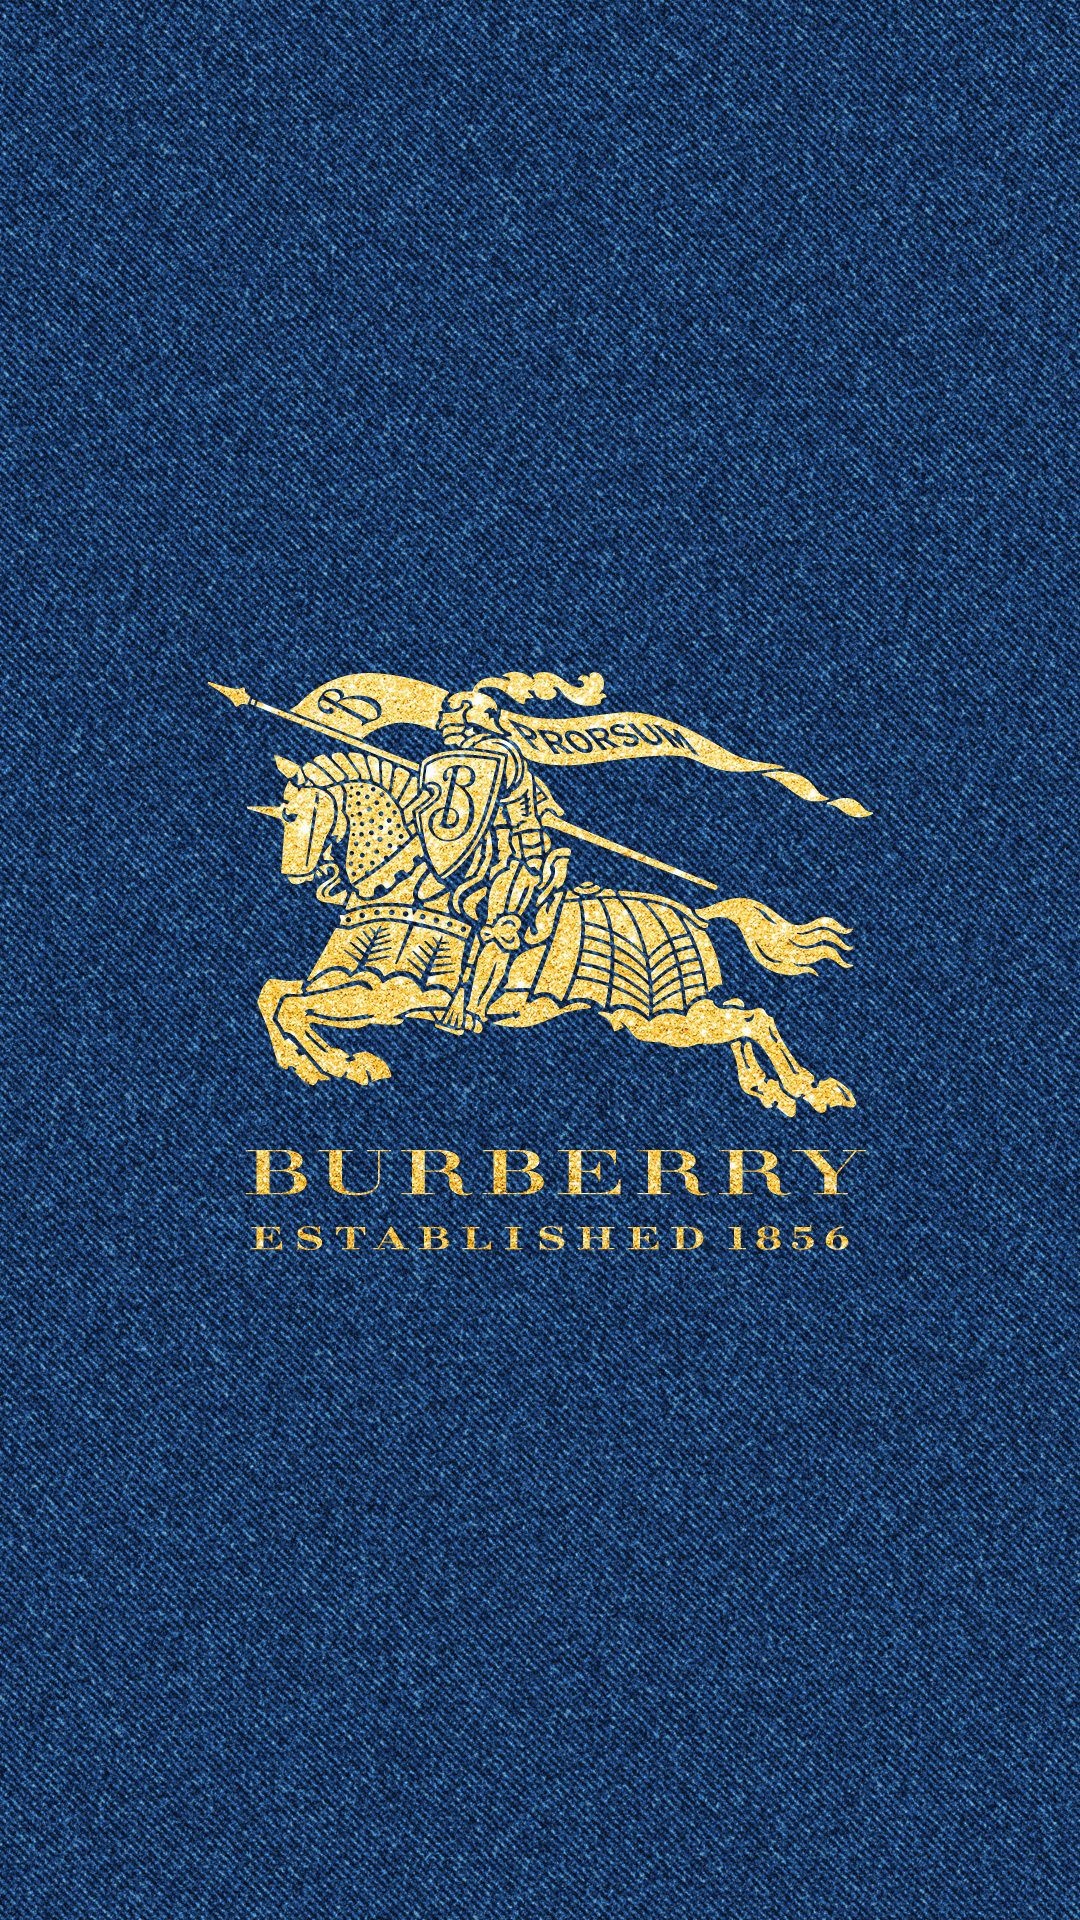 Burberry: The iconic Equestrian Knight logo, A symbol of British heritage design. 1080x1920 Full HD Wallpaper.